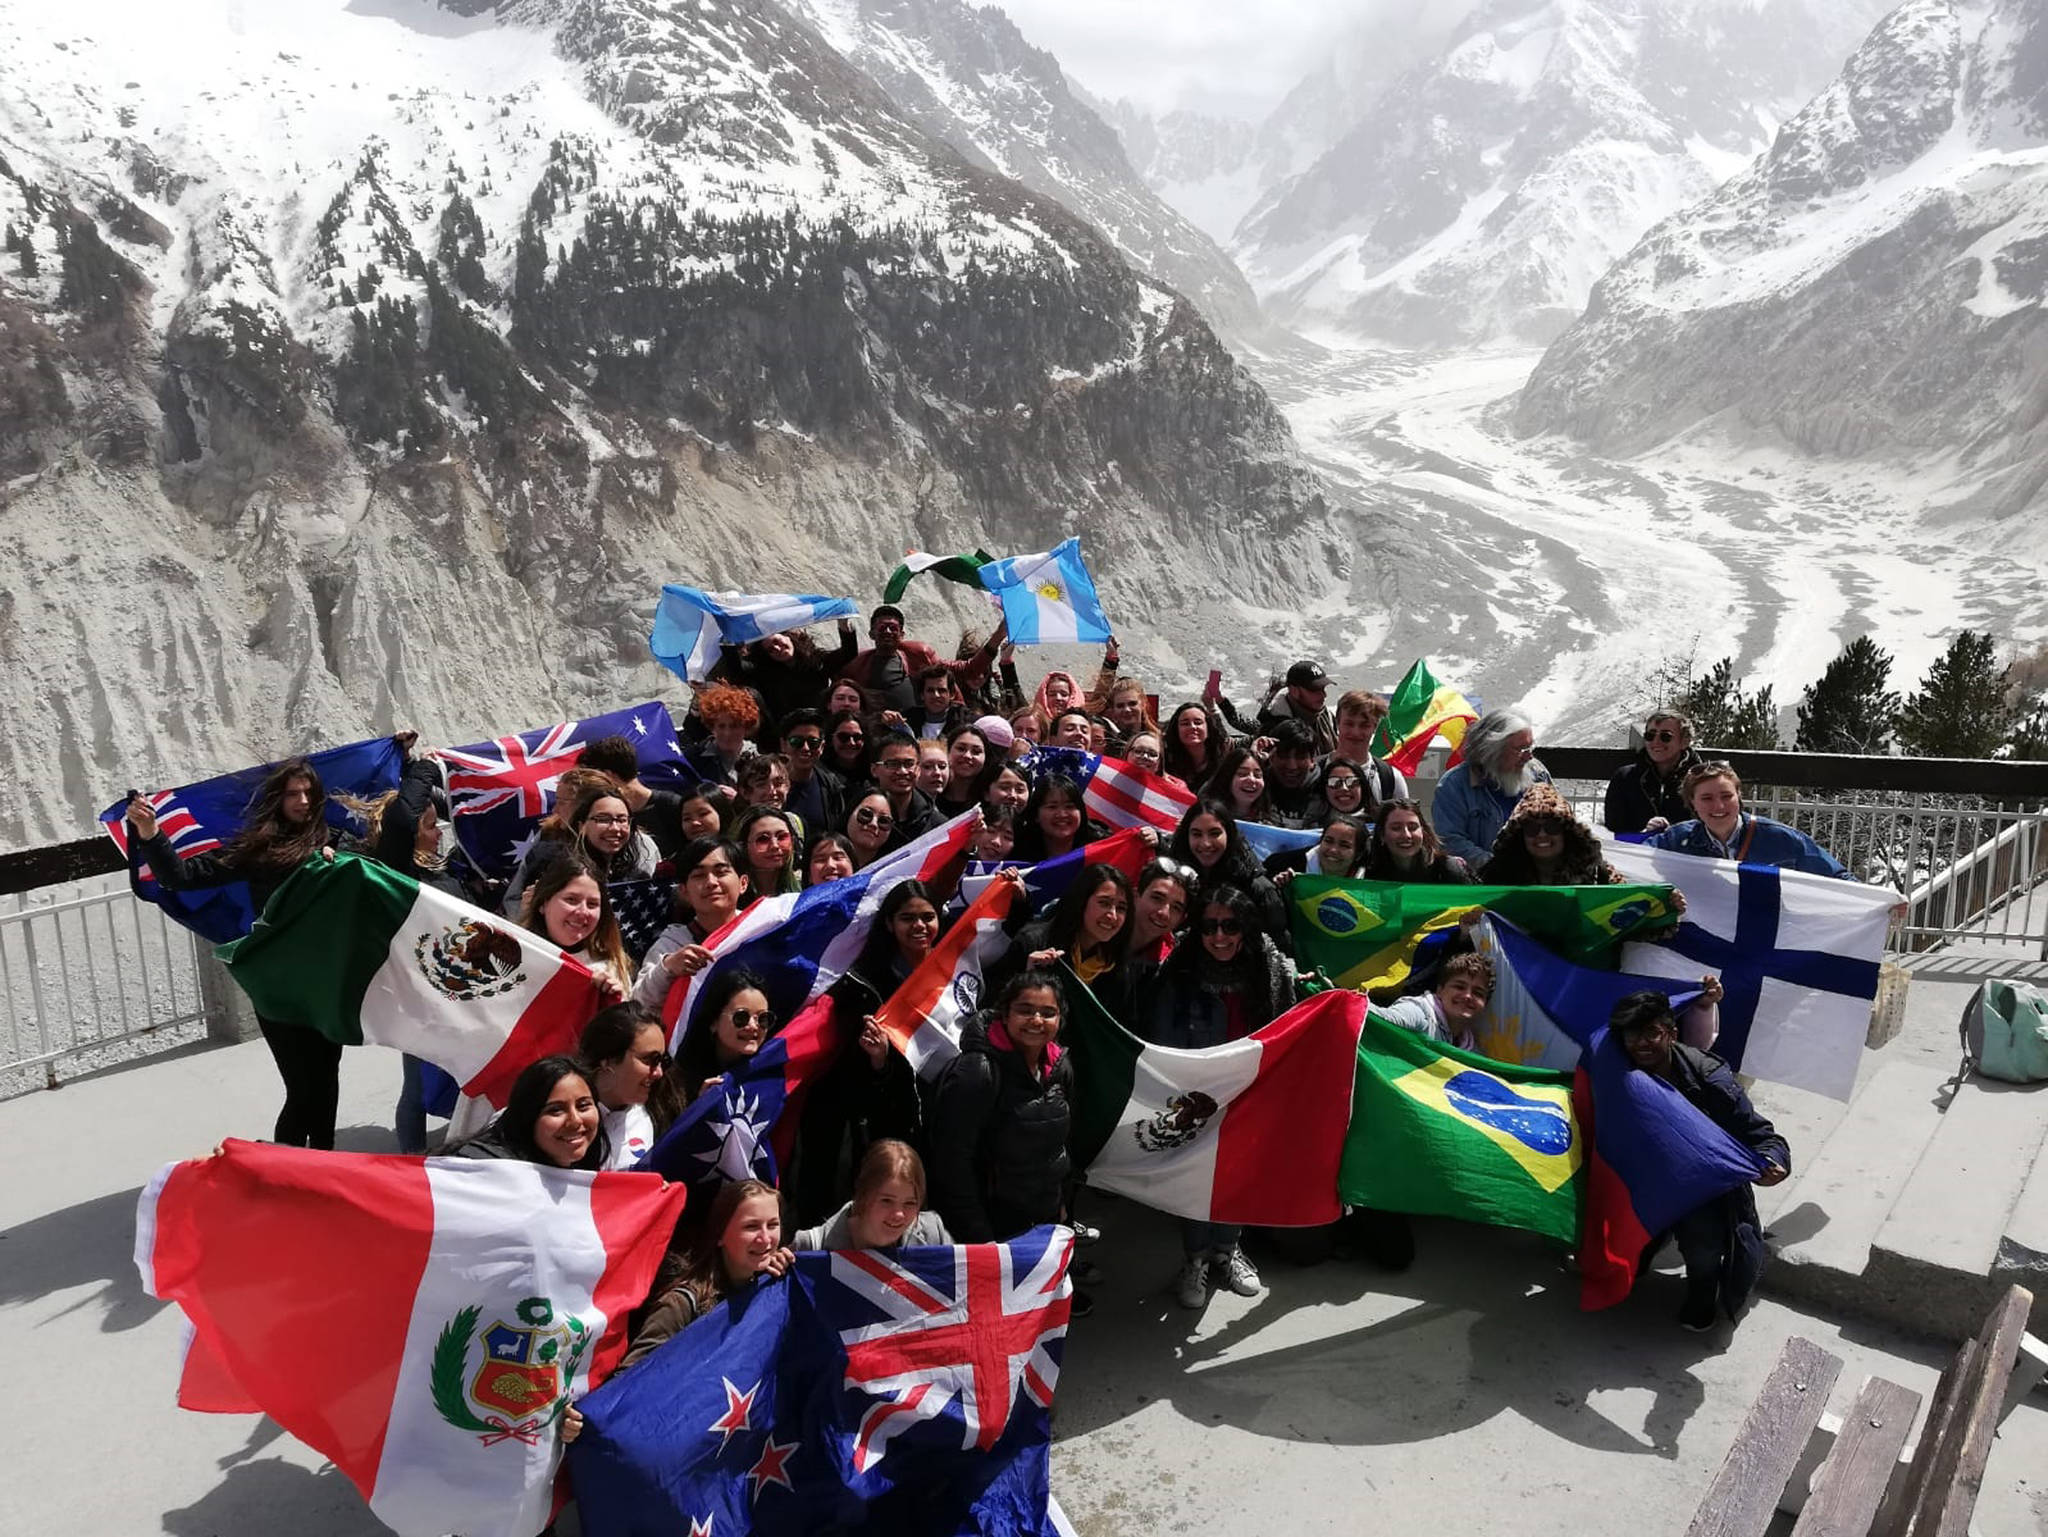 The entire Europe tour group from all over the world in Chamonix, France in April 2019. (Bridget McTague | For the Juneau Empire)